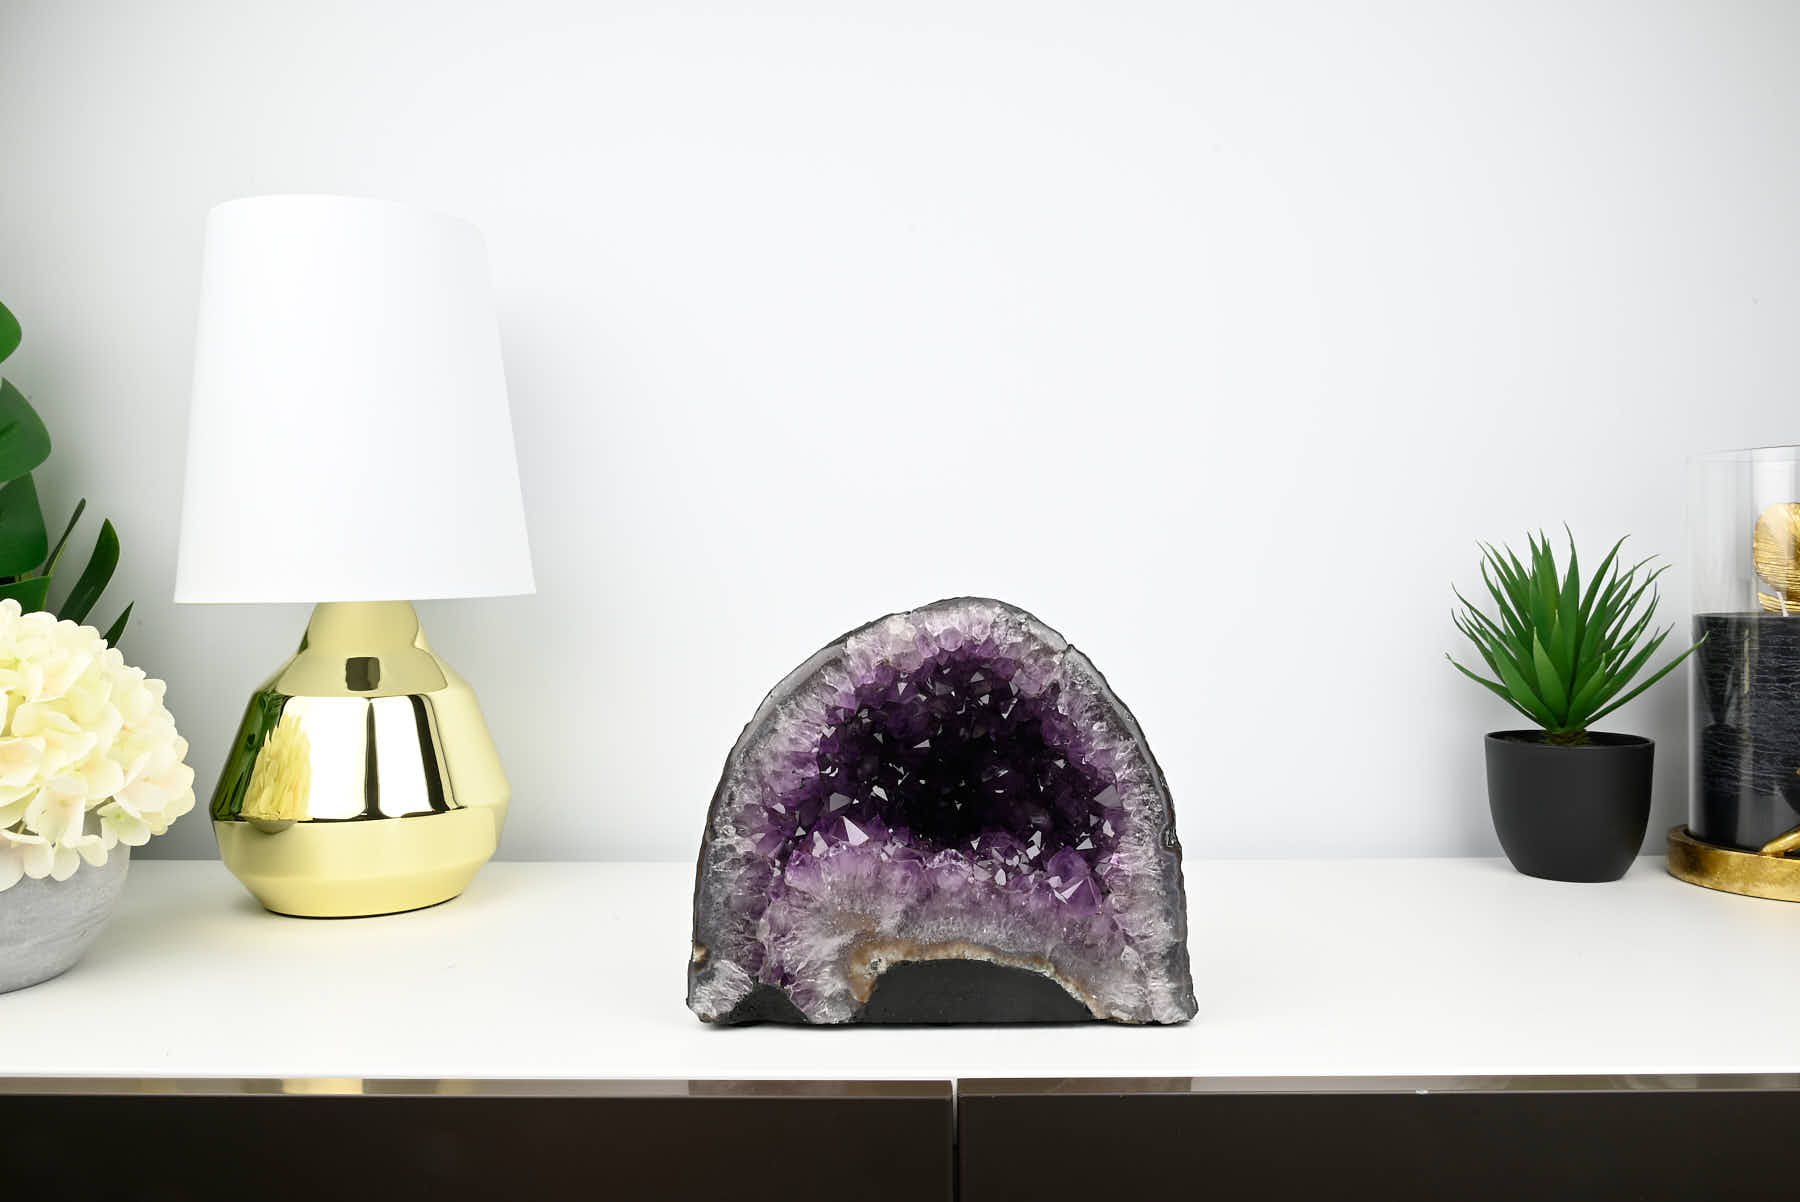 Extra Quality Amethyst Cathedral - 6.26kg, 18cm tall - #CAAMET-10012